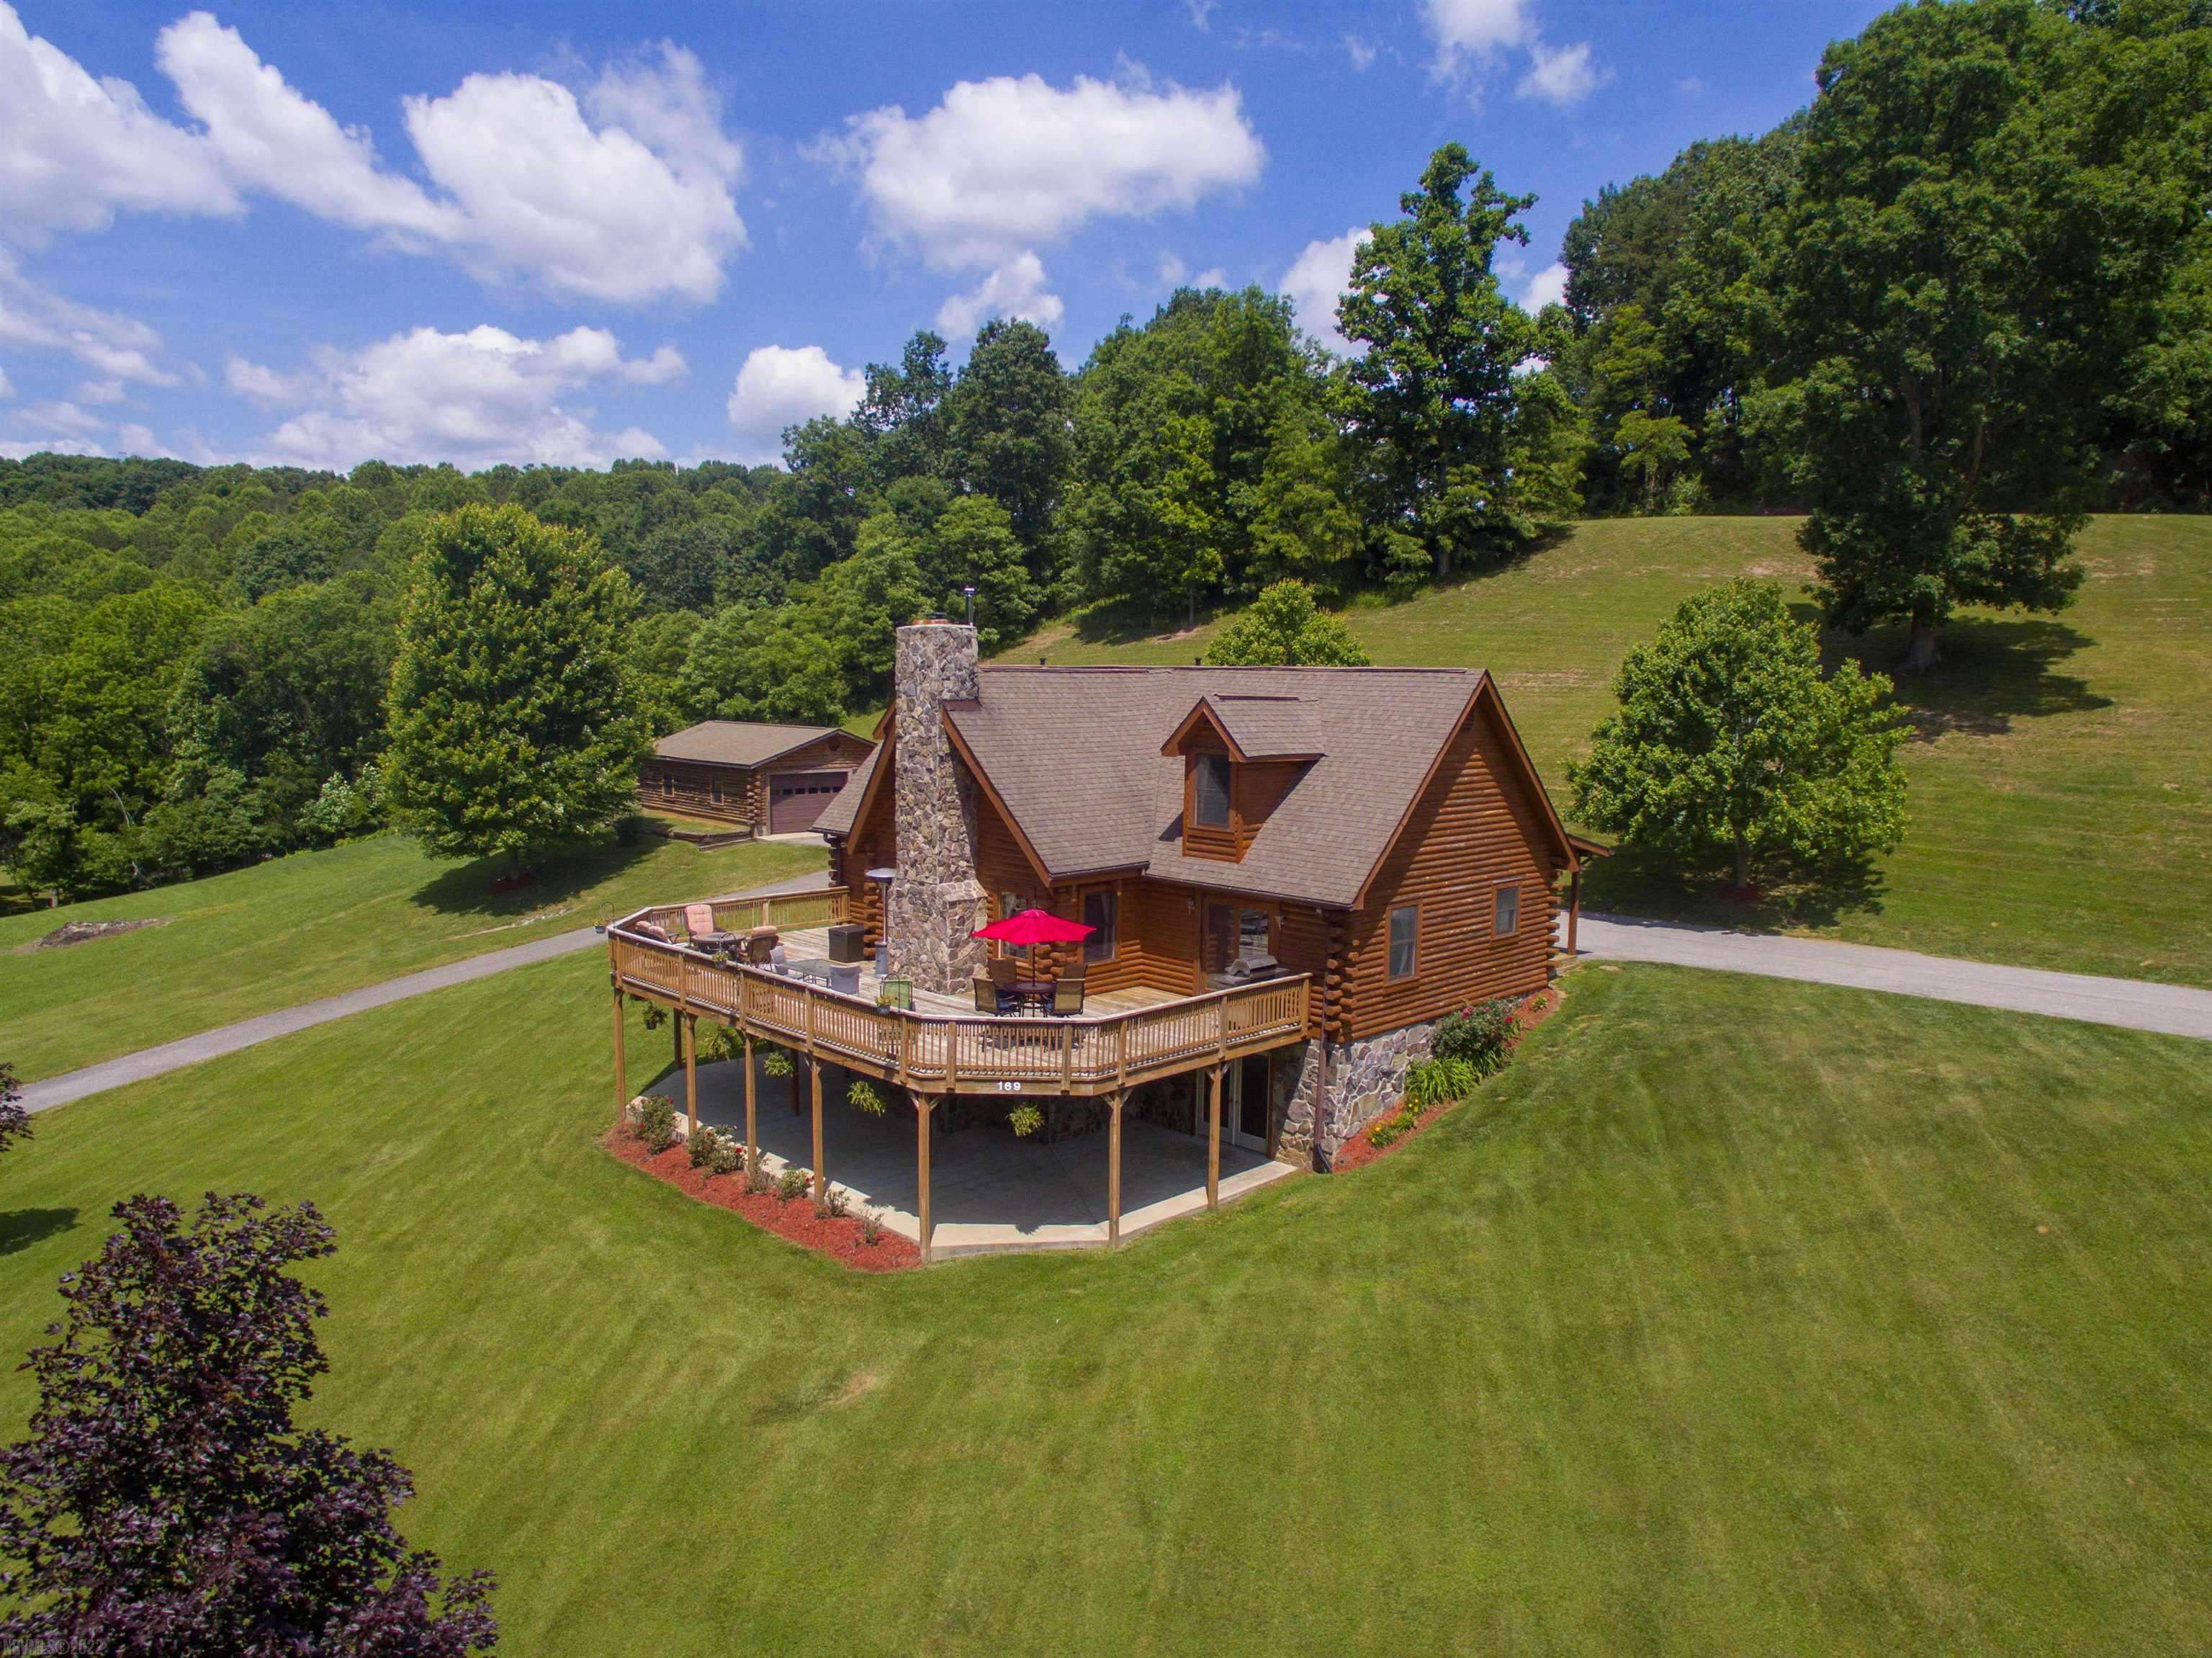 Looking for a great location in a private neighborhood about 5 mins from Downtown Wytheville??? Look no further than this beautiful log home sitting on 3 acres just on the outskirts of town. The house is a 3 bedroom, 2.5 baths and approximately 3250sqft with additional square footage that could be finished out to potentially add an additional bedroom and bath. The home boasts a large eat-in kitchen that leads into a large living room that displays a beautiful stone fireplace acting as a centerpiece for the whole home. The master bedroom is located on the first floor and has a large master bath and walk-in closet. Feel free to cook out with friends & family on the huge deck that extends the living space outdoors or gather around the fire pit taking in the stars and enjoying the country air only minutes outside of town!!! This property is in a very desirable private neighborhood and it’s not going to last long!! So schedule your showing today!!